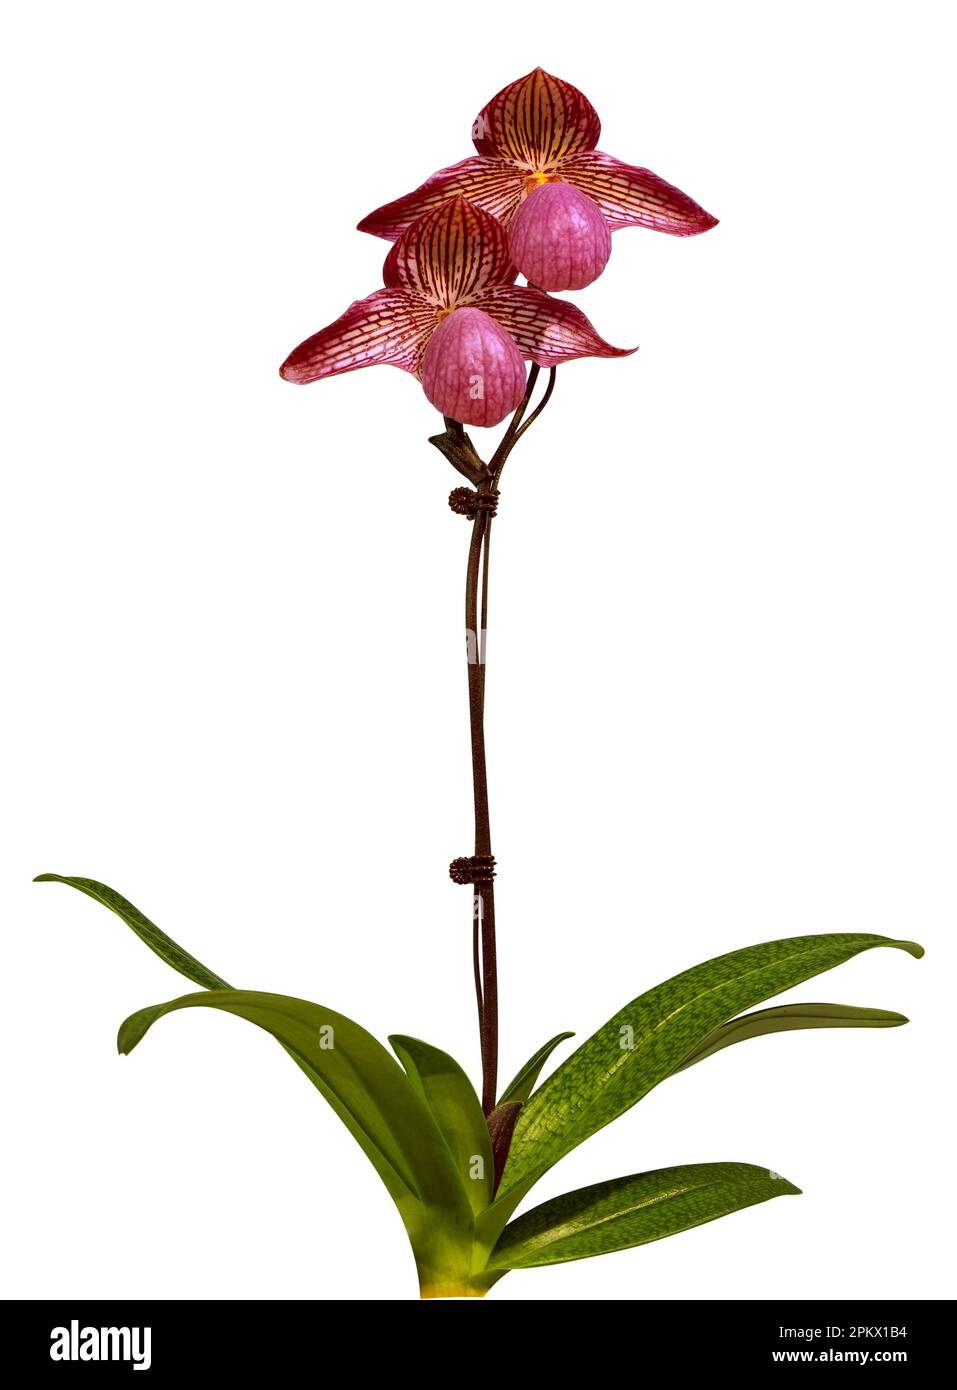 Flower colors are pink, yellow and brown. An orchid of the genus Paphiopedilum. Close-up of isolated beautiful plant. Stock Photo